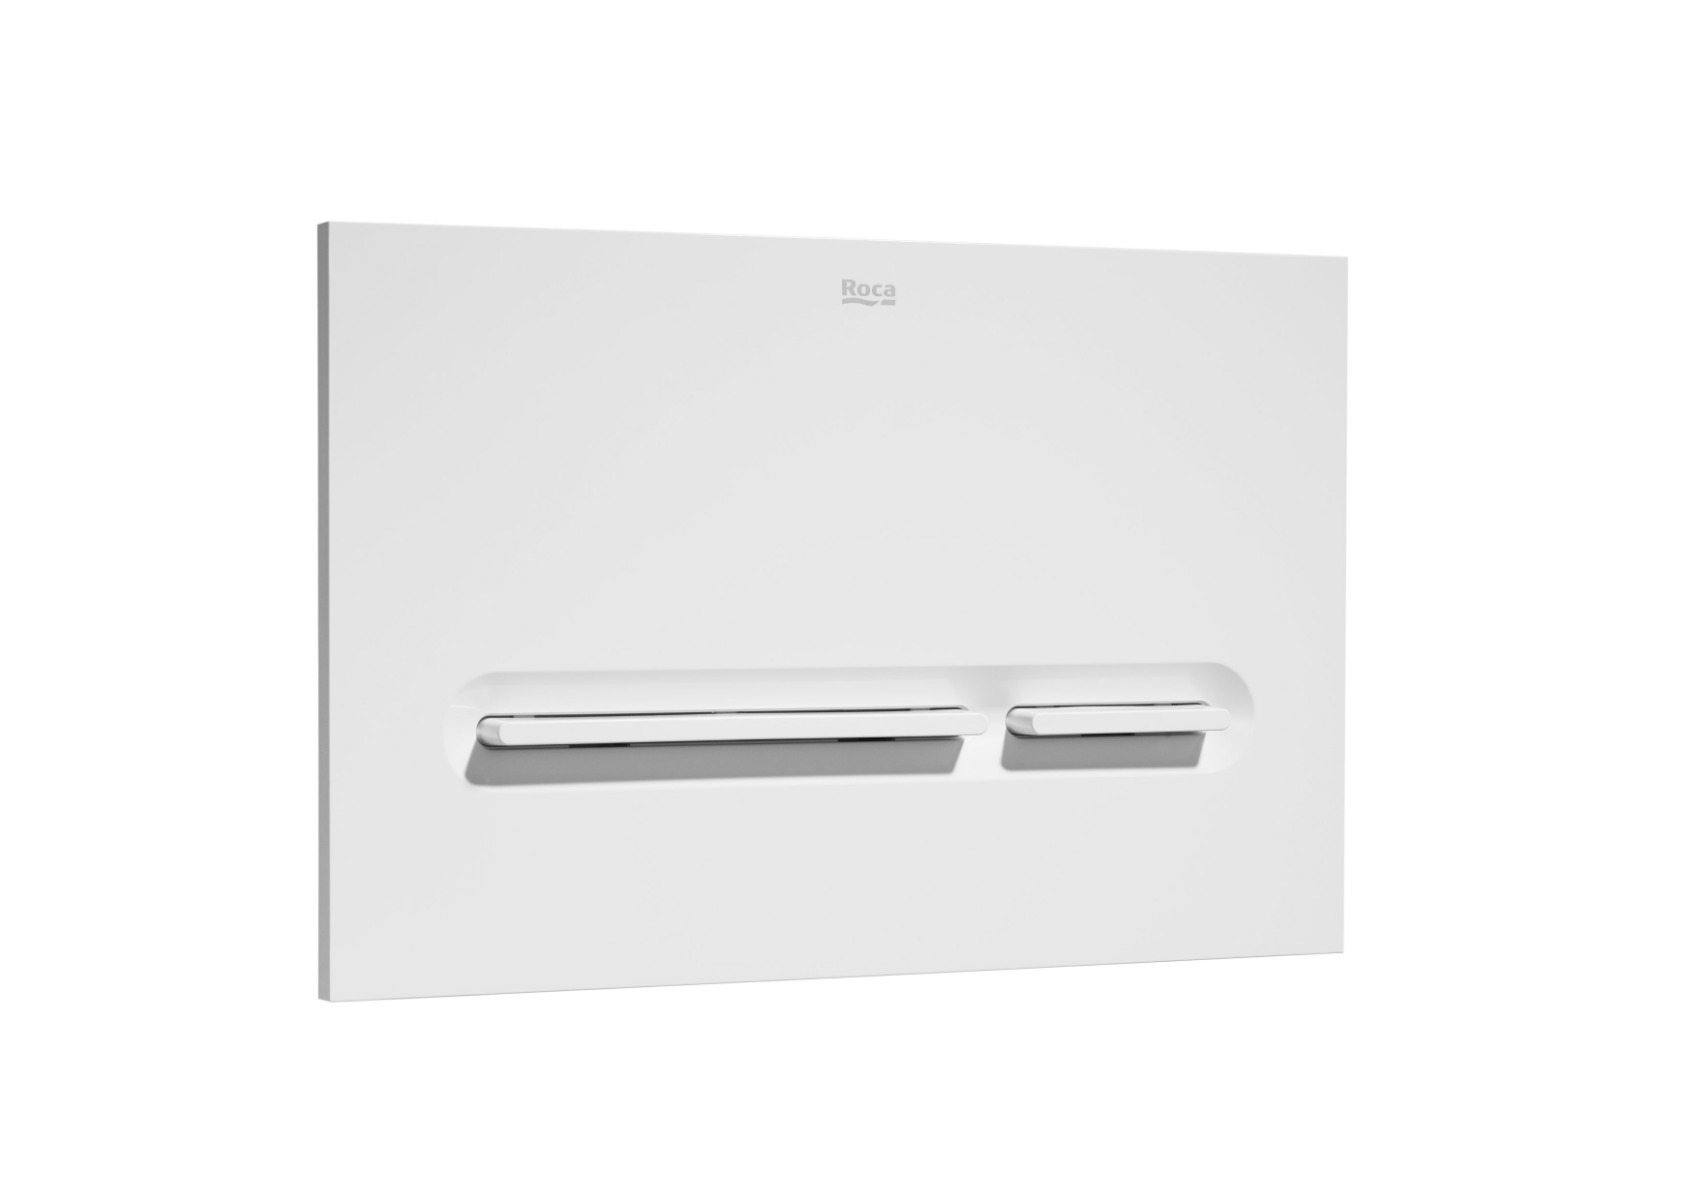 PL5 DUAL - Dual flush operating plate for concealed cistern white